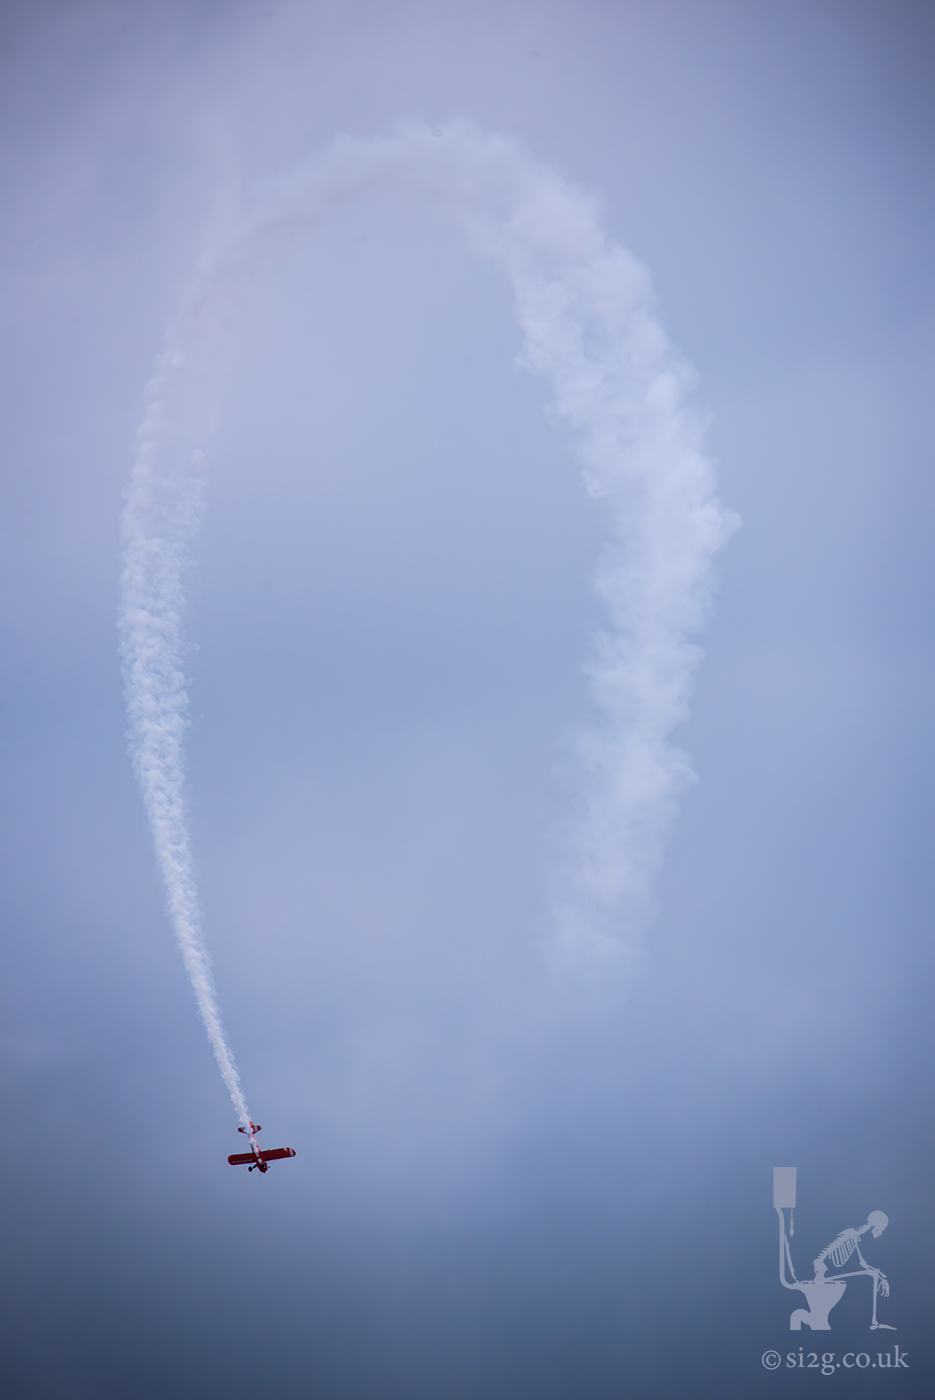 Loop the Loop - The Wales National Airshow 2017 was nearly rained off, but this daredevil still entertained the crowds with a loop-the-loop.